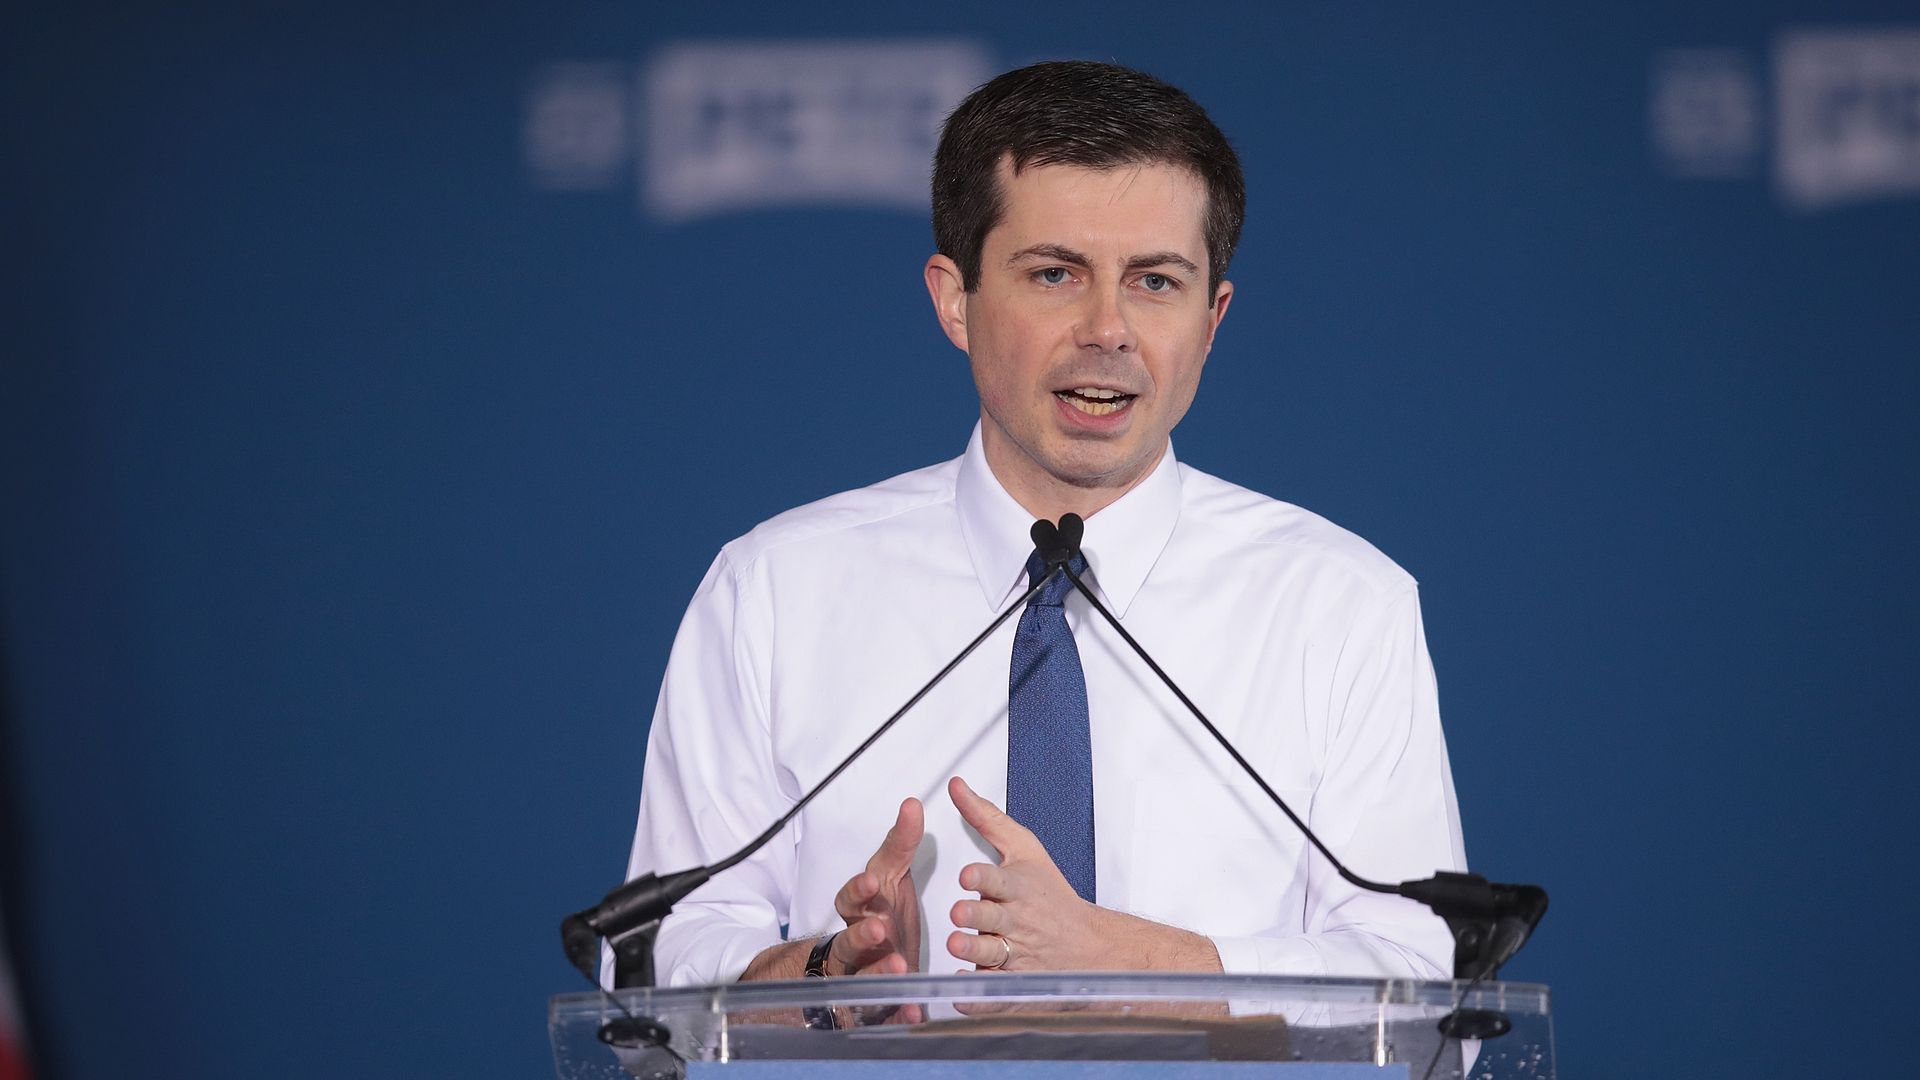 2020 presidential candidate Pete Buttigieg will give back donations from lobbyists - Axios1920 x 1080